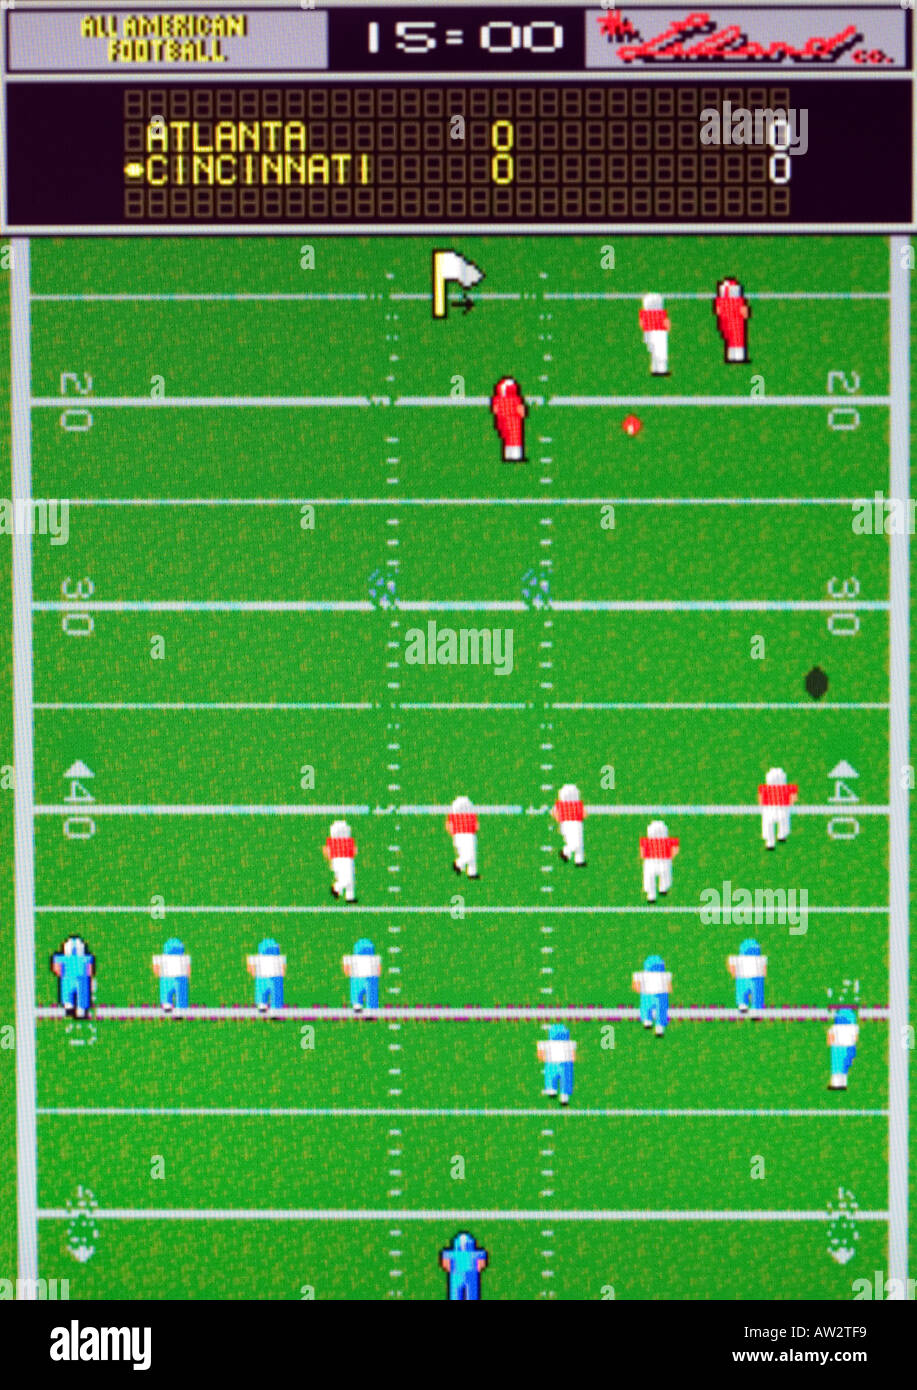 All American Football 1989 Leland Corp Vintage arcade videogame screen shot  - EDITORIAL USE ONLY Stock Photo - Alamy